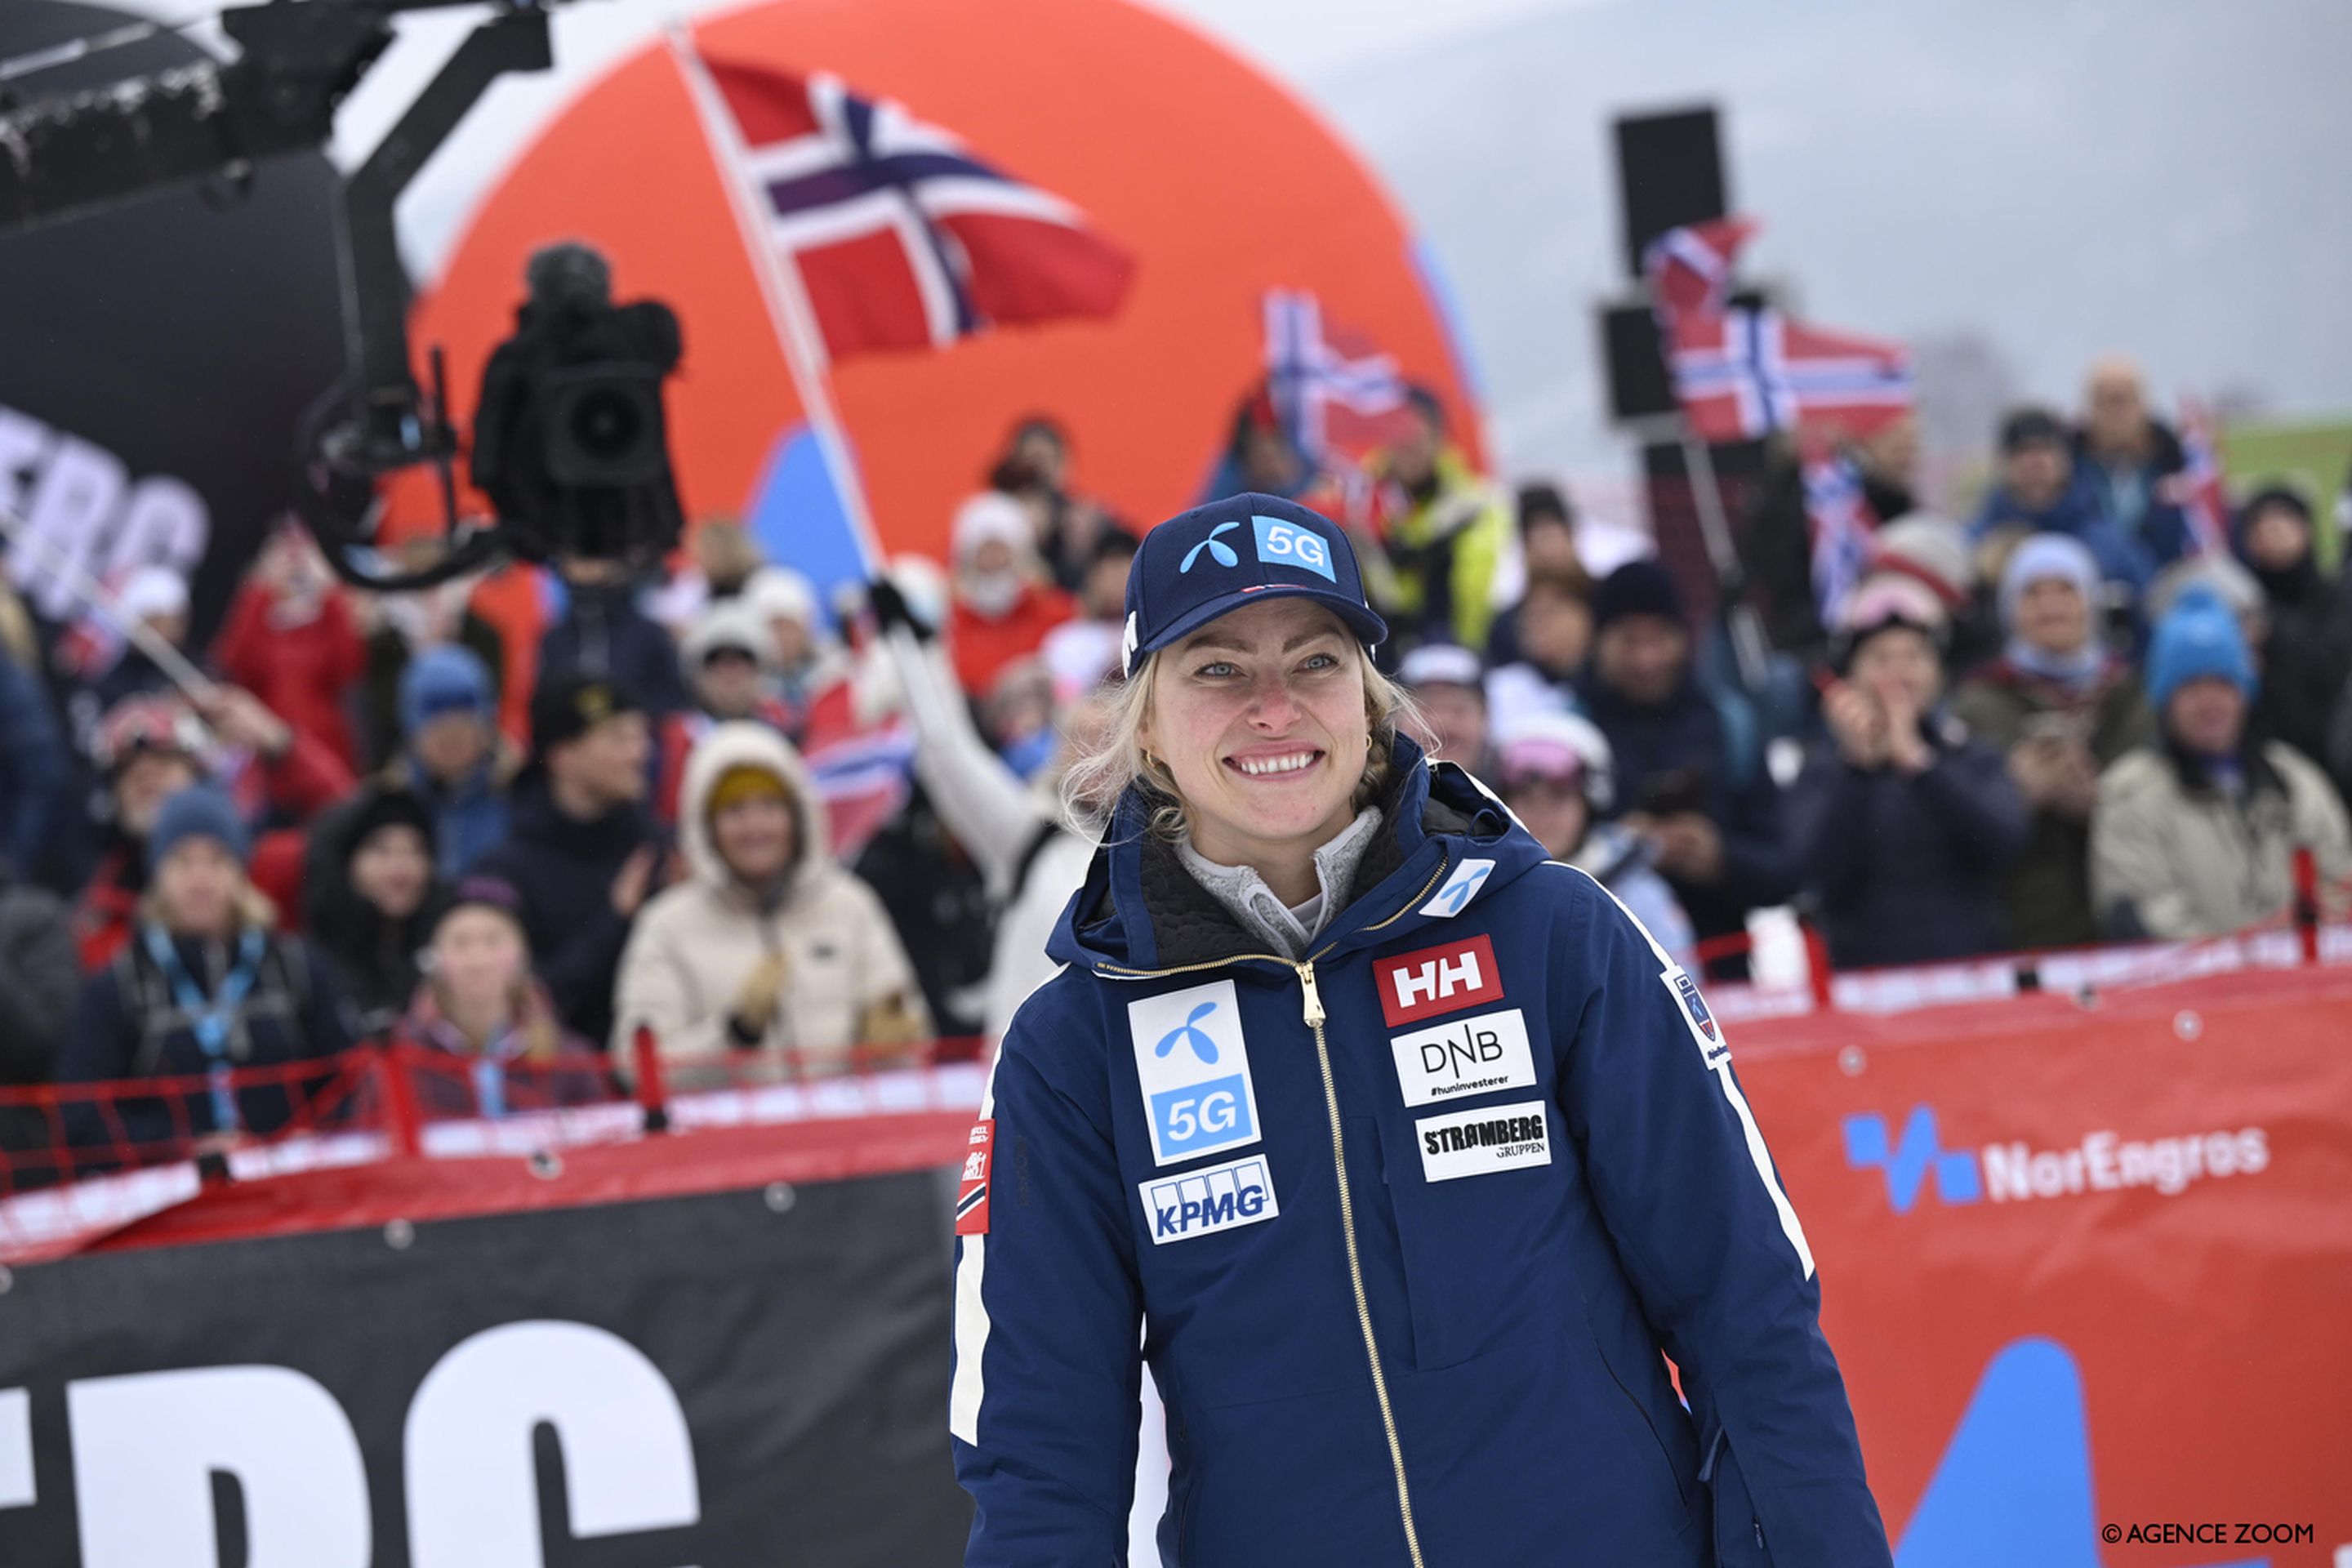 Mowinckel being celebrated in Kvitfjell after she announced her retirement